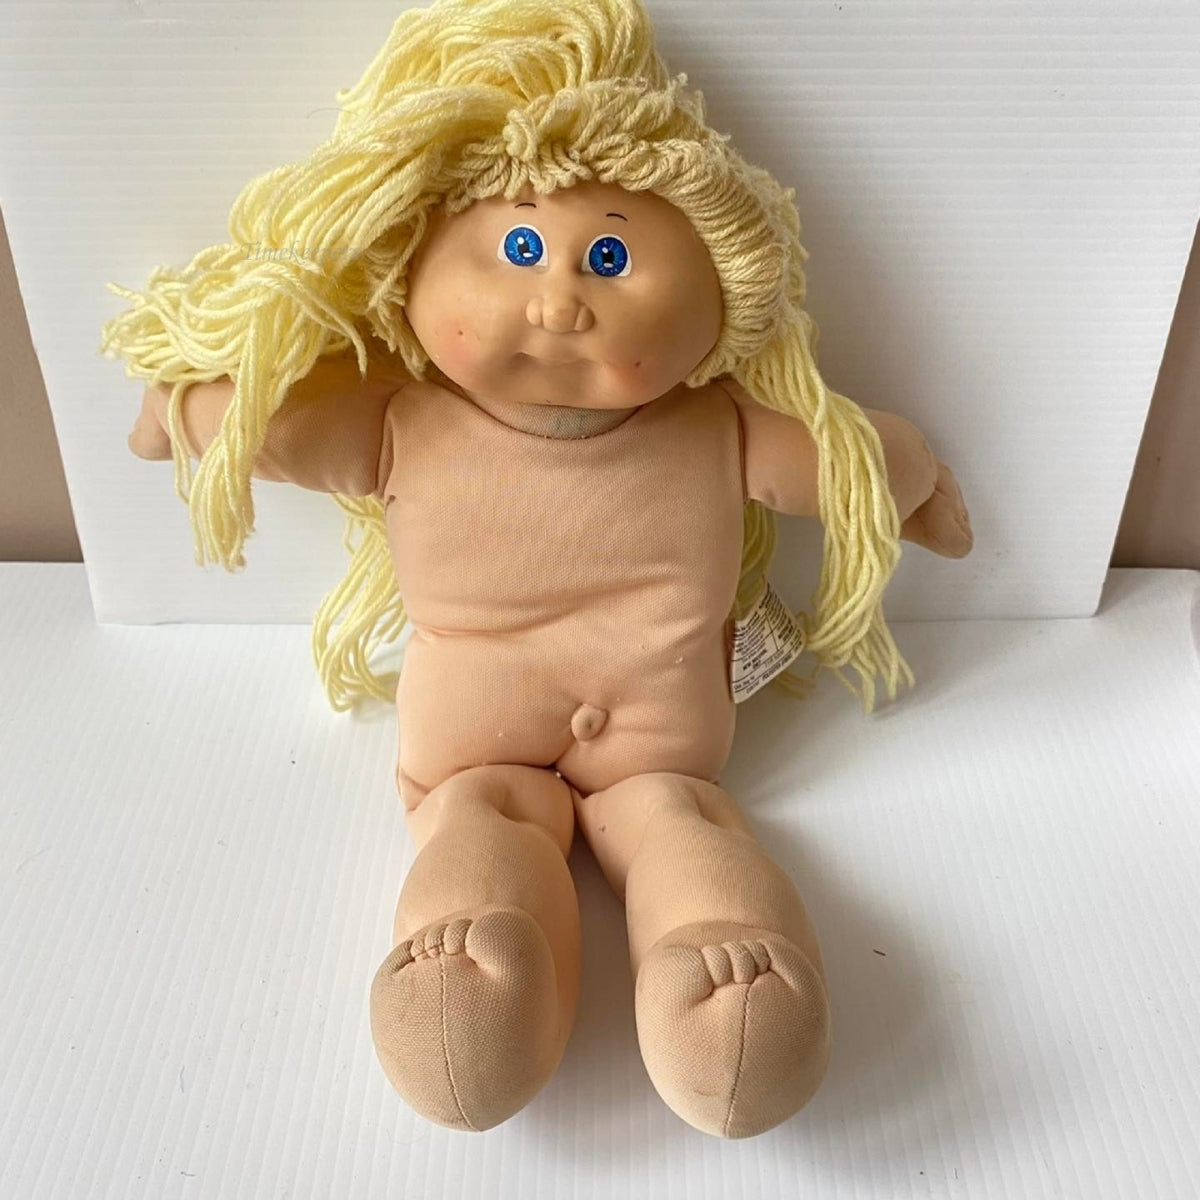 m550 Rare1982 Cabbage Patch Doll Soft Body Loop Hair Signed by